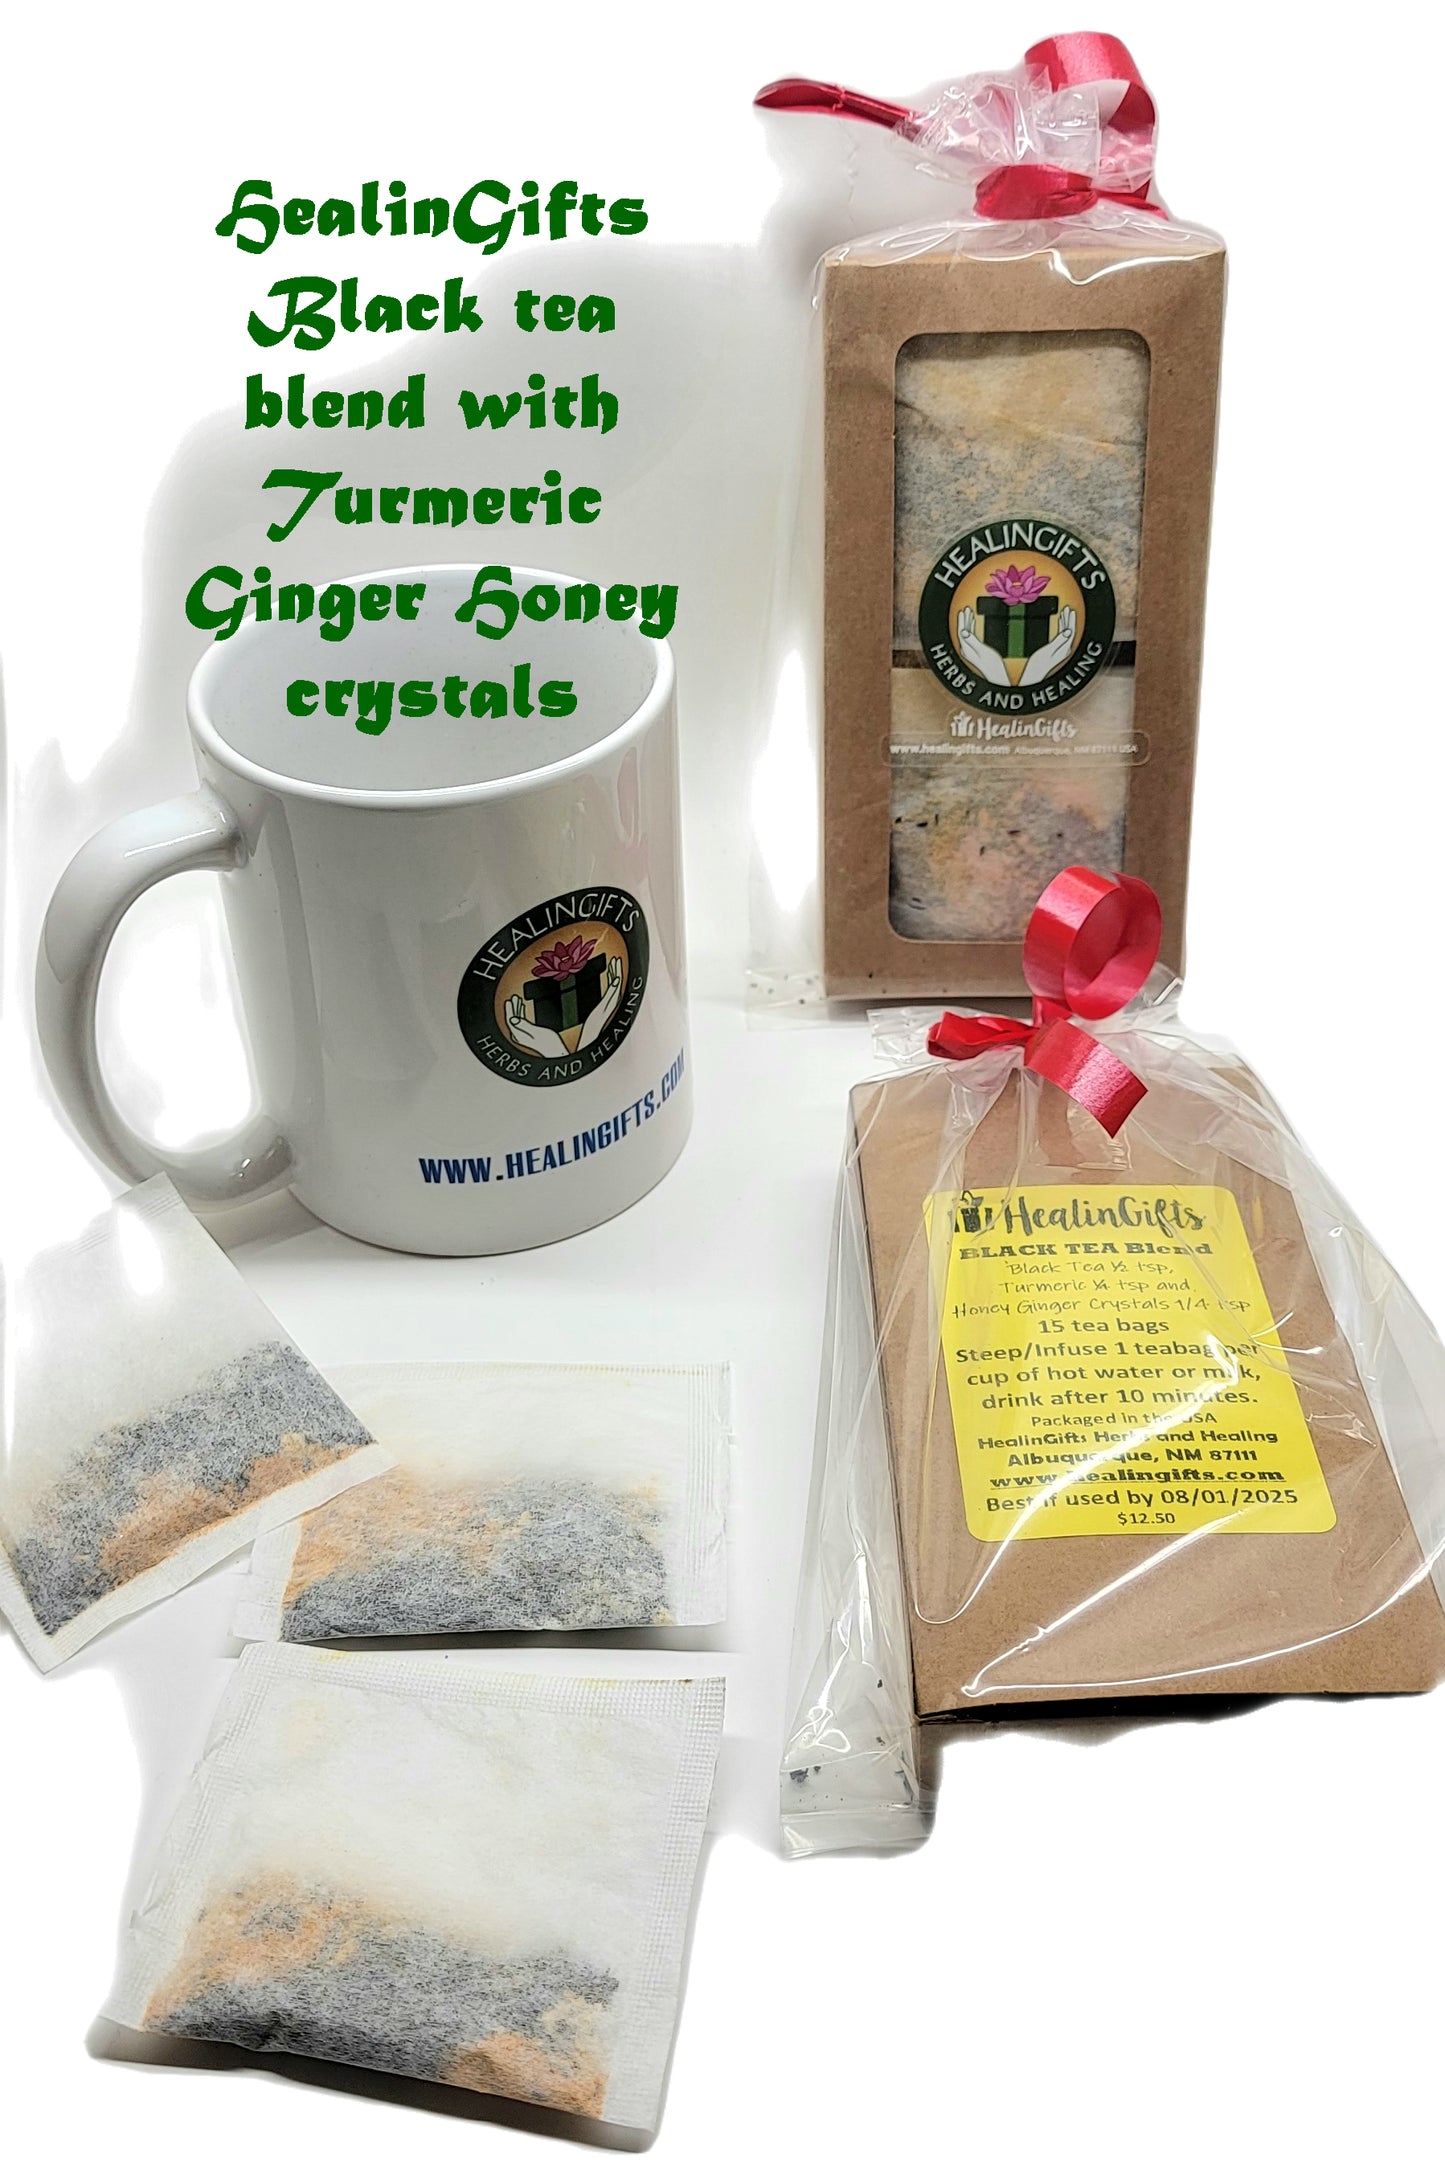 Black Tea with Turmeric and Ginger Honey crystals 15tea bags per box gift ready